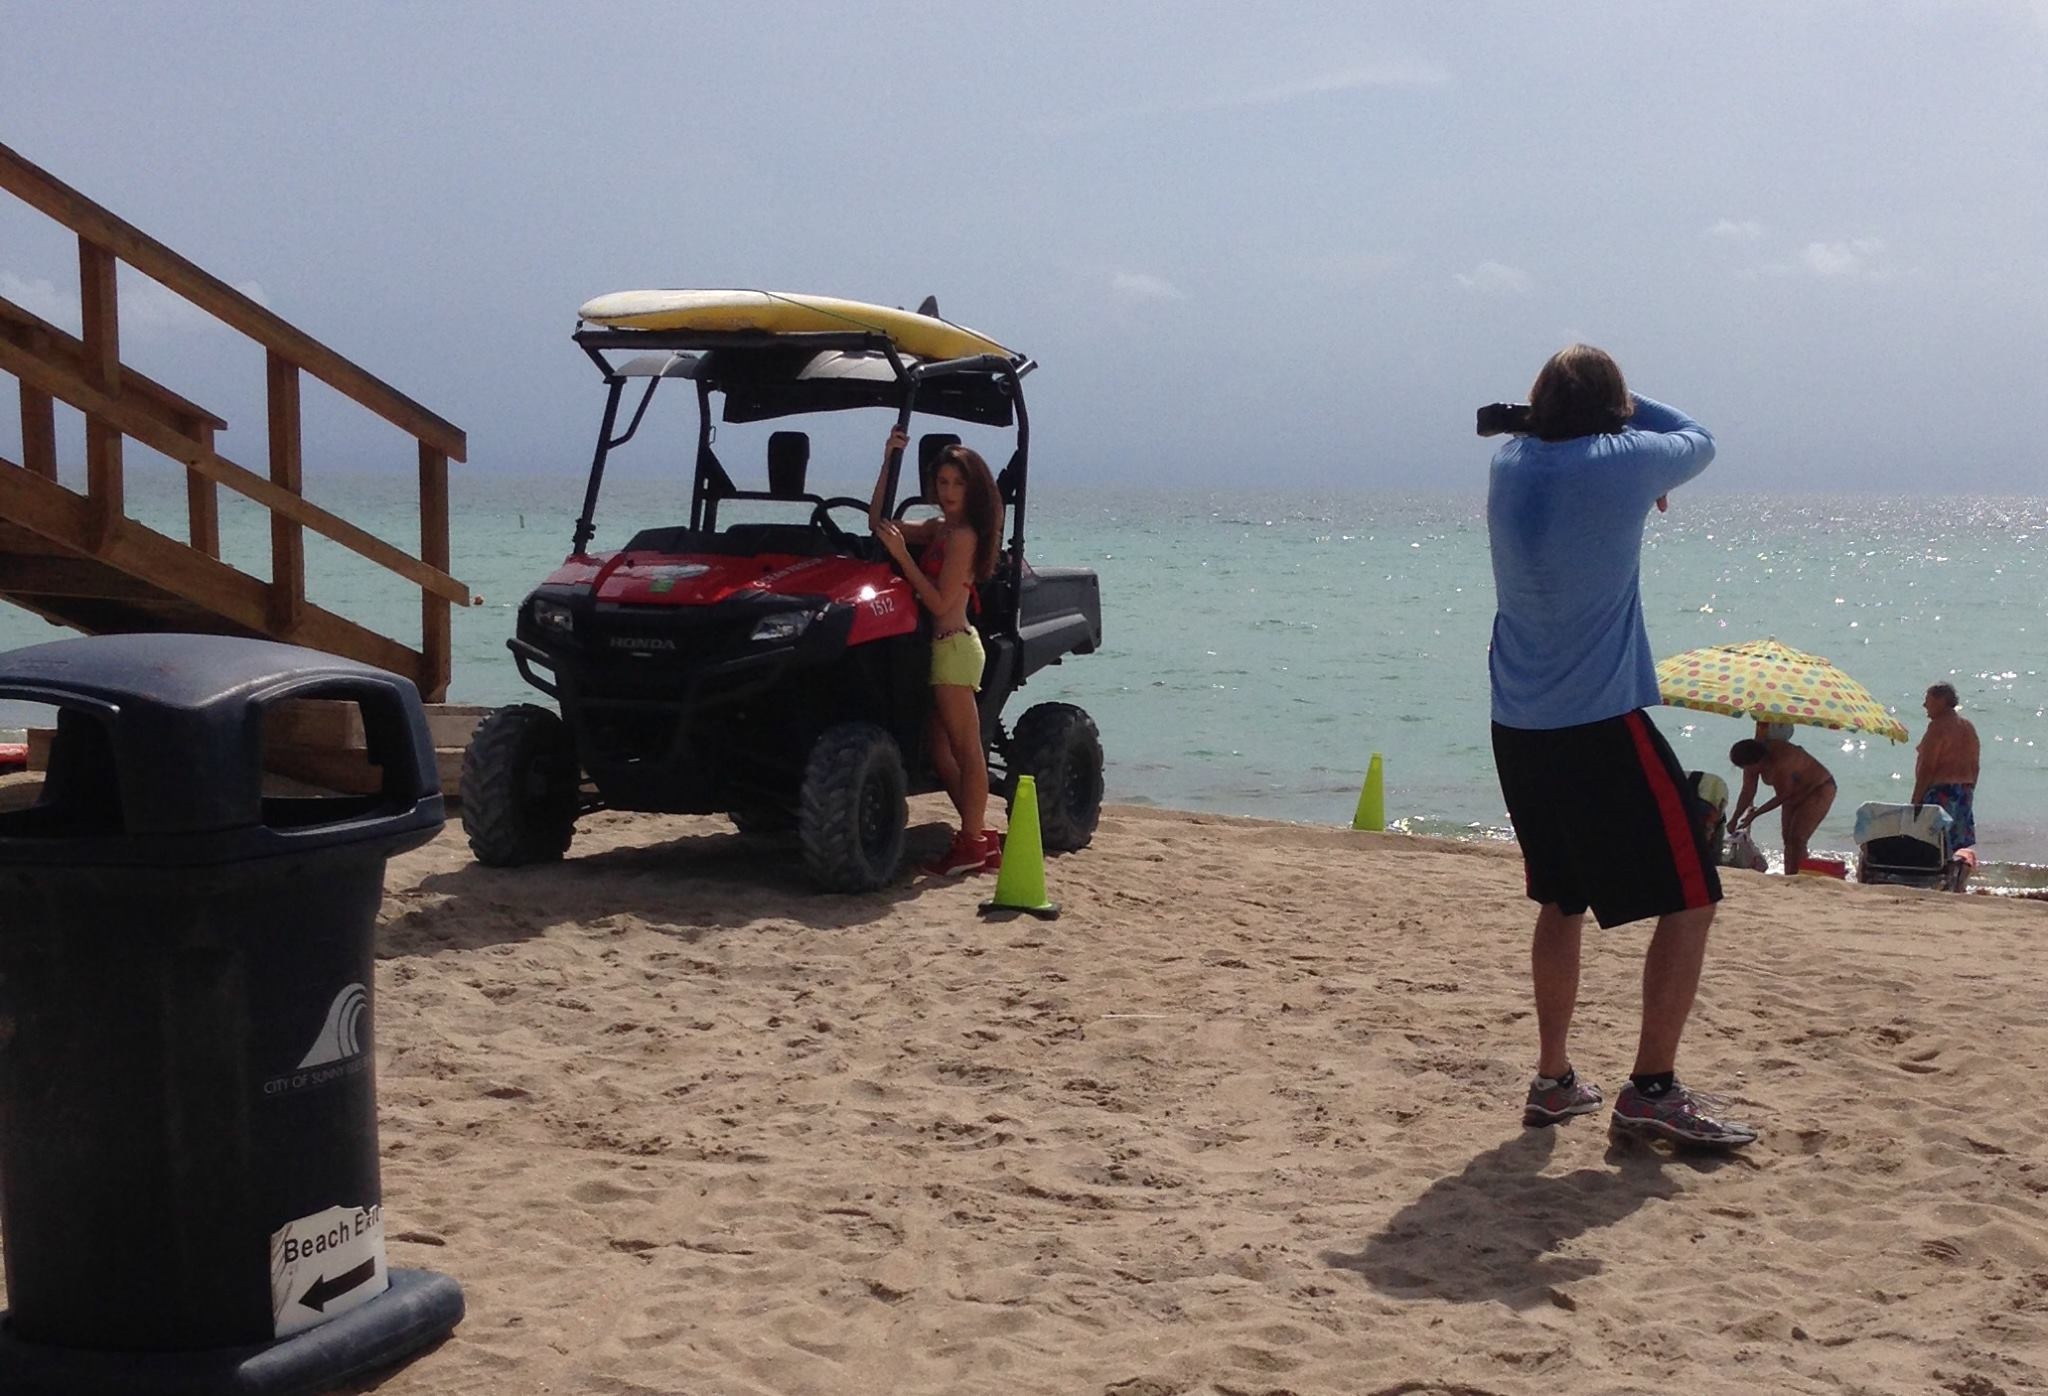 Behind the scenes photoshoot in Miami Beach.